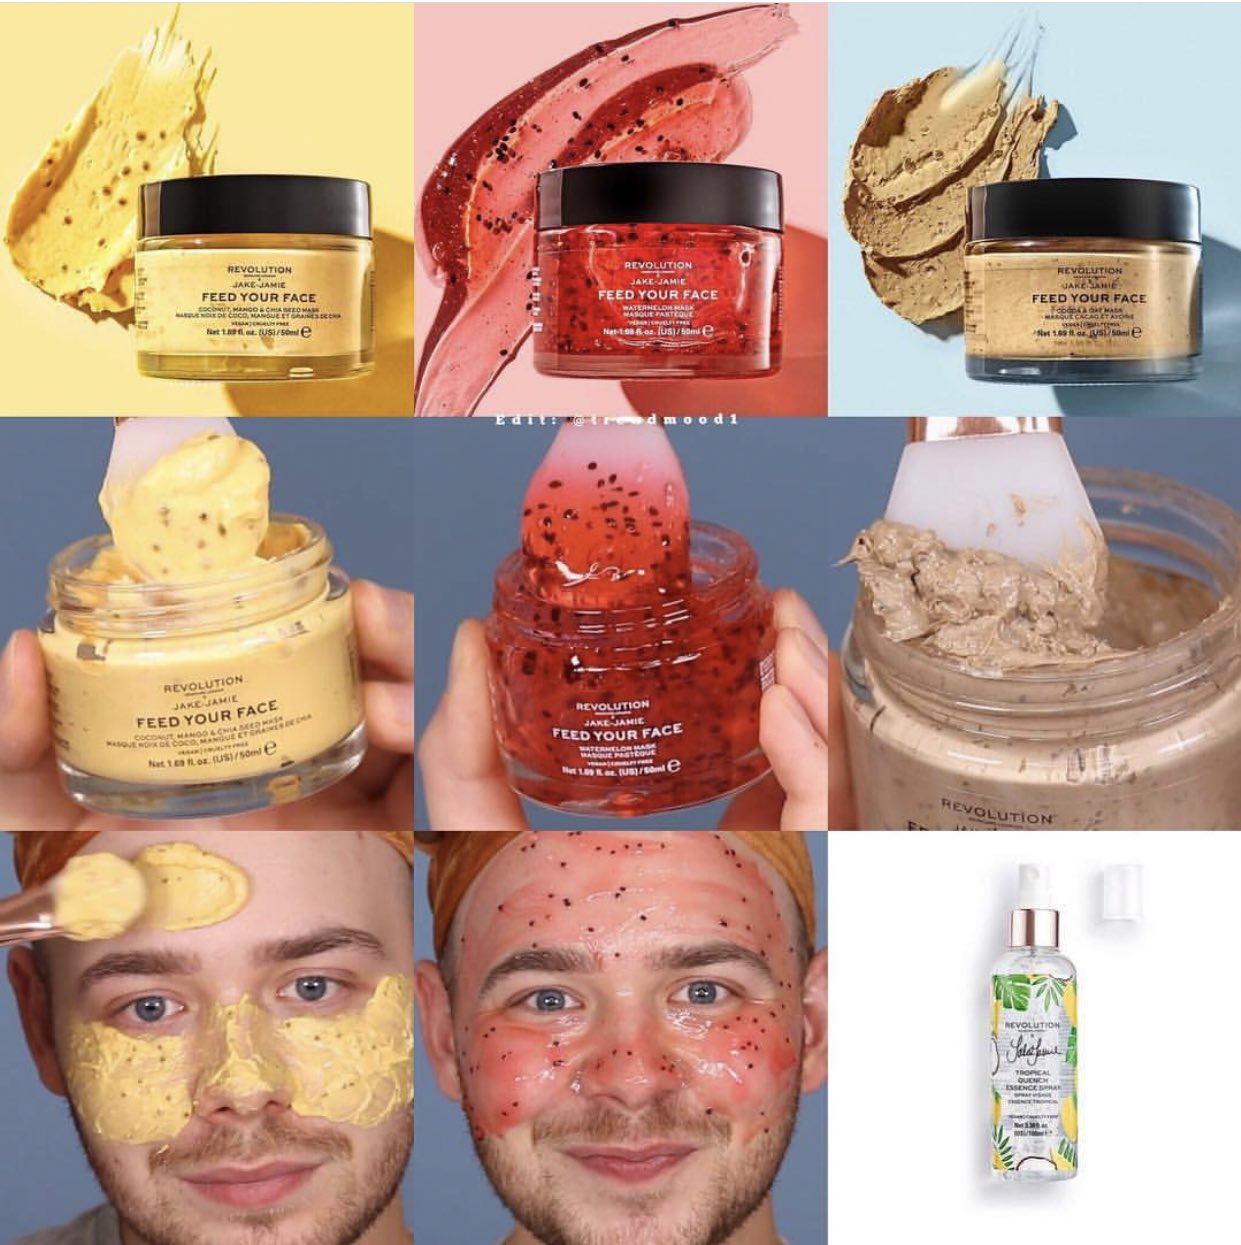 Trendmood on Twitter: "Available Now! 🚨 Online @makeuprevolution NEW Collab! 💦😍 #makeuprevolution X #jakejamie Includes: -Tropical Essence Spray 🌴$7 -Watermelon Hydrating Mask 🍉 $11 -Coconut, Mango &amp; Chi Seed Radiant Glow